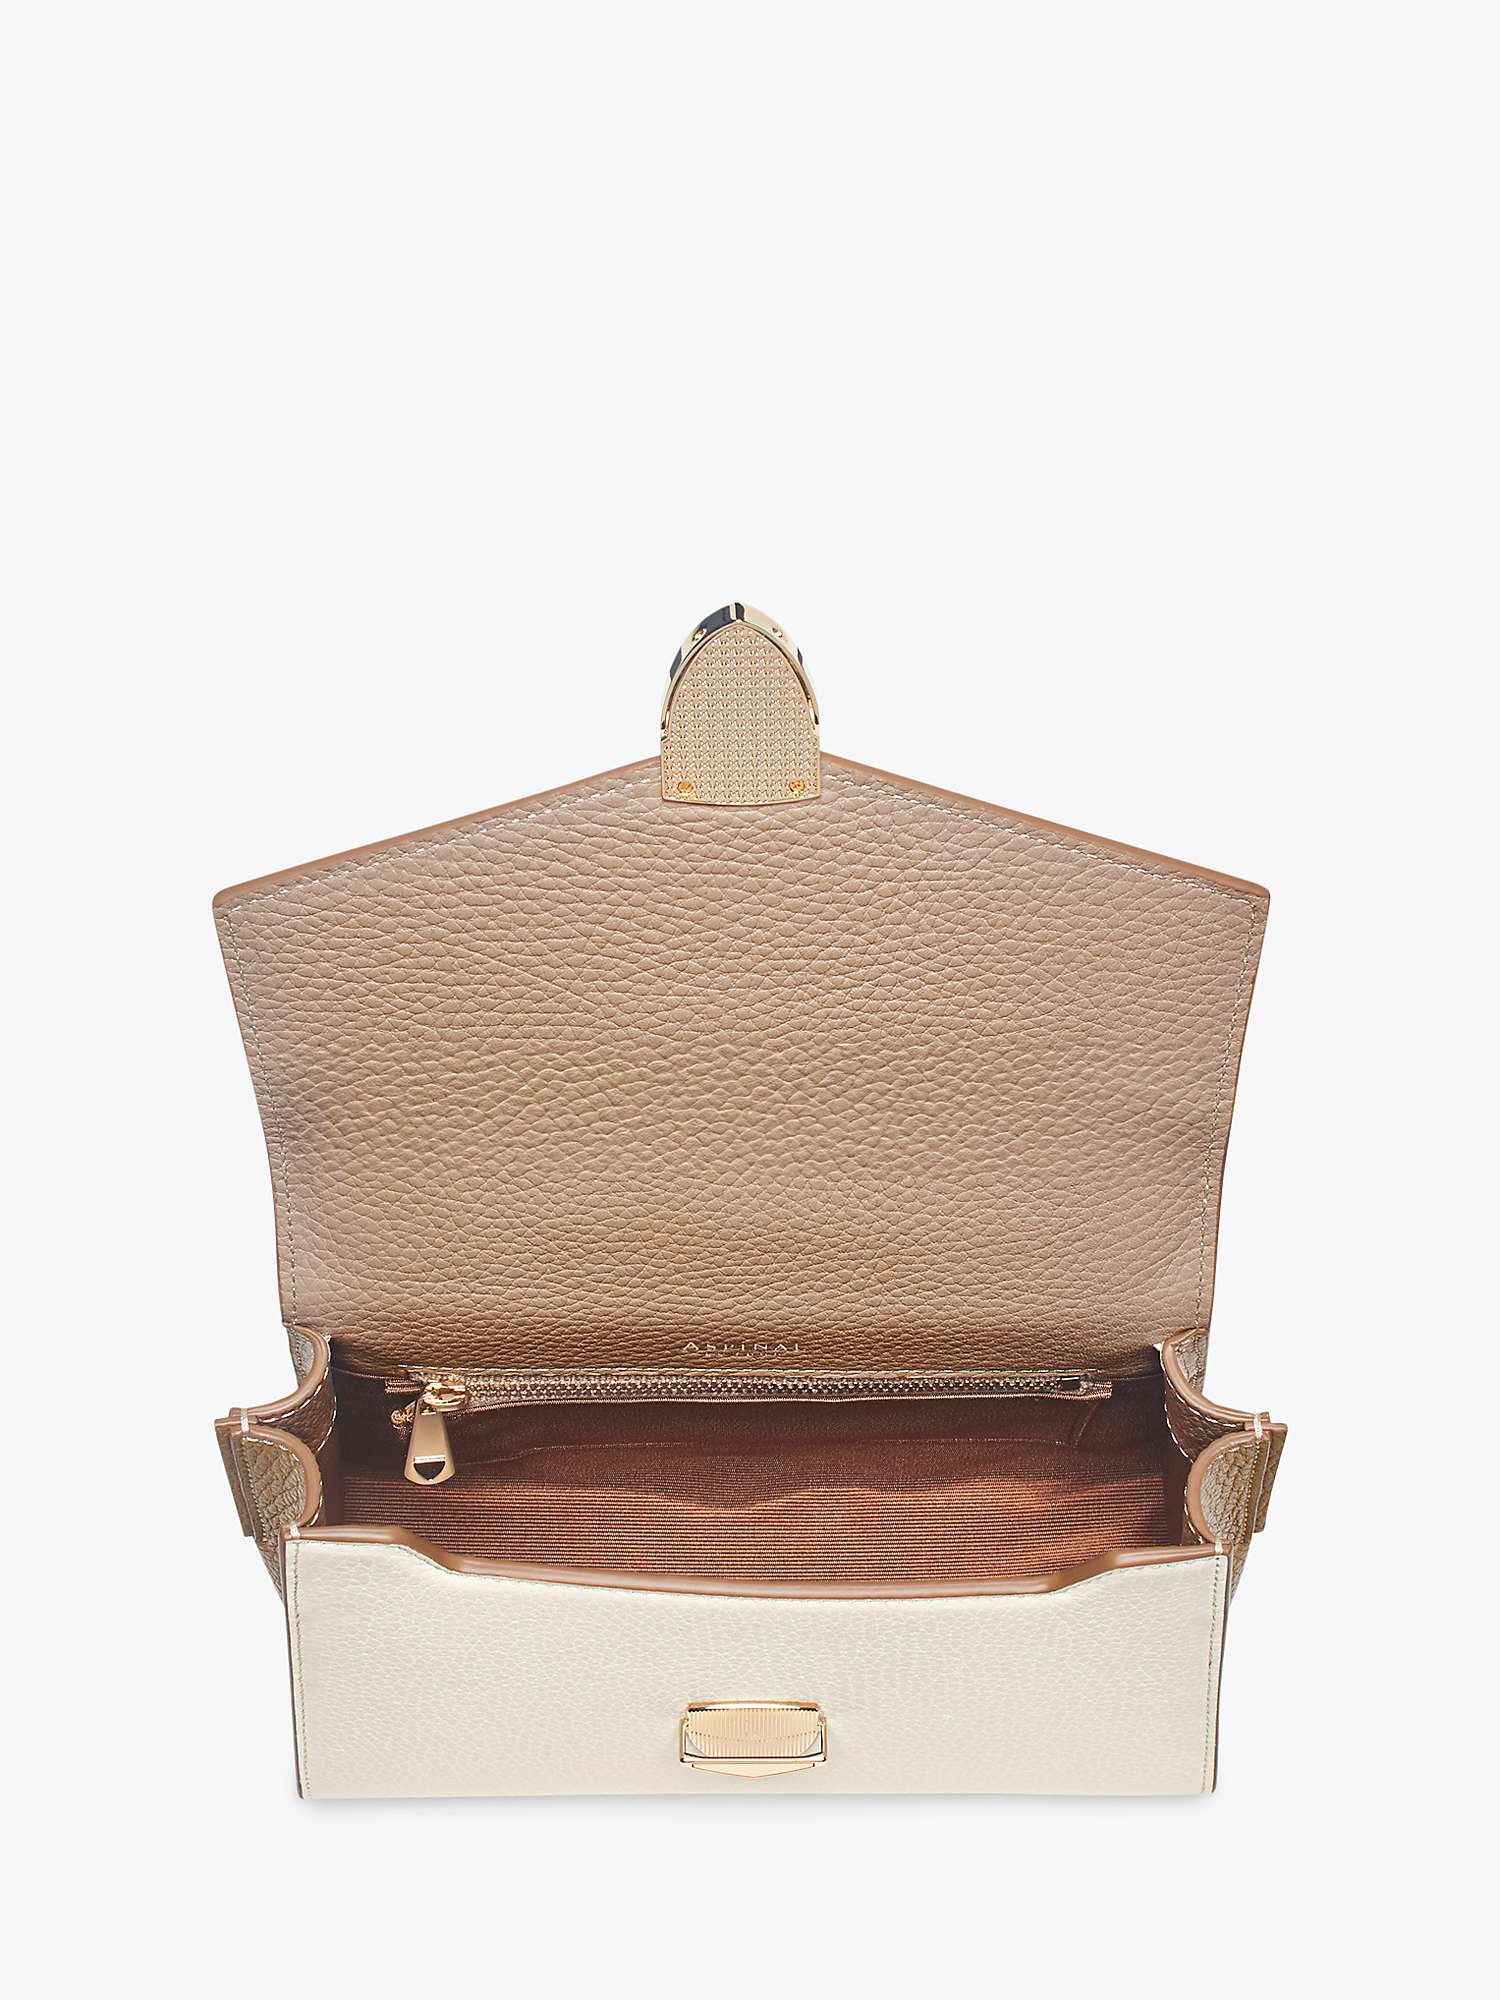 Buy Aspinal of London Midi Mayfair 2.0 Cross Body Bag, Taupe/Ivory Online at johnlewis.com